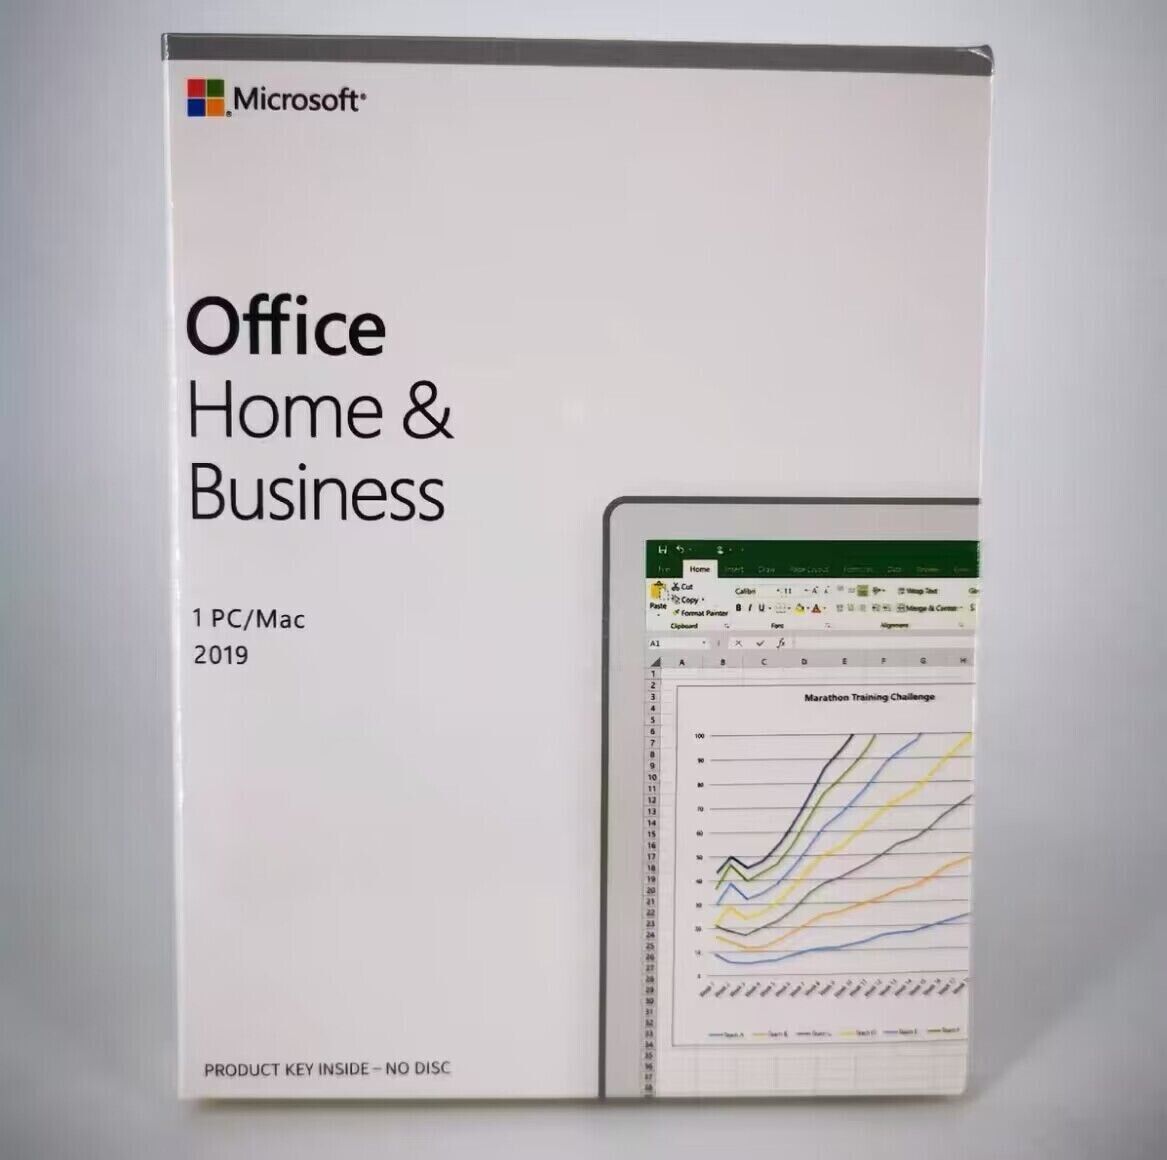 Microsoft Office Home and Business 2019 License Key for 1 PC